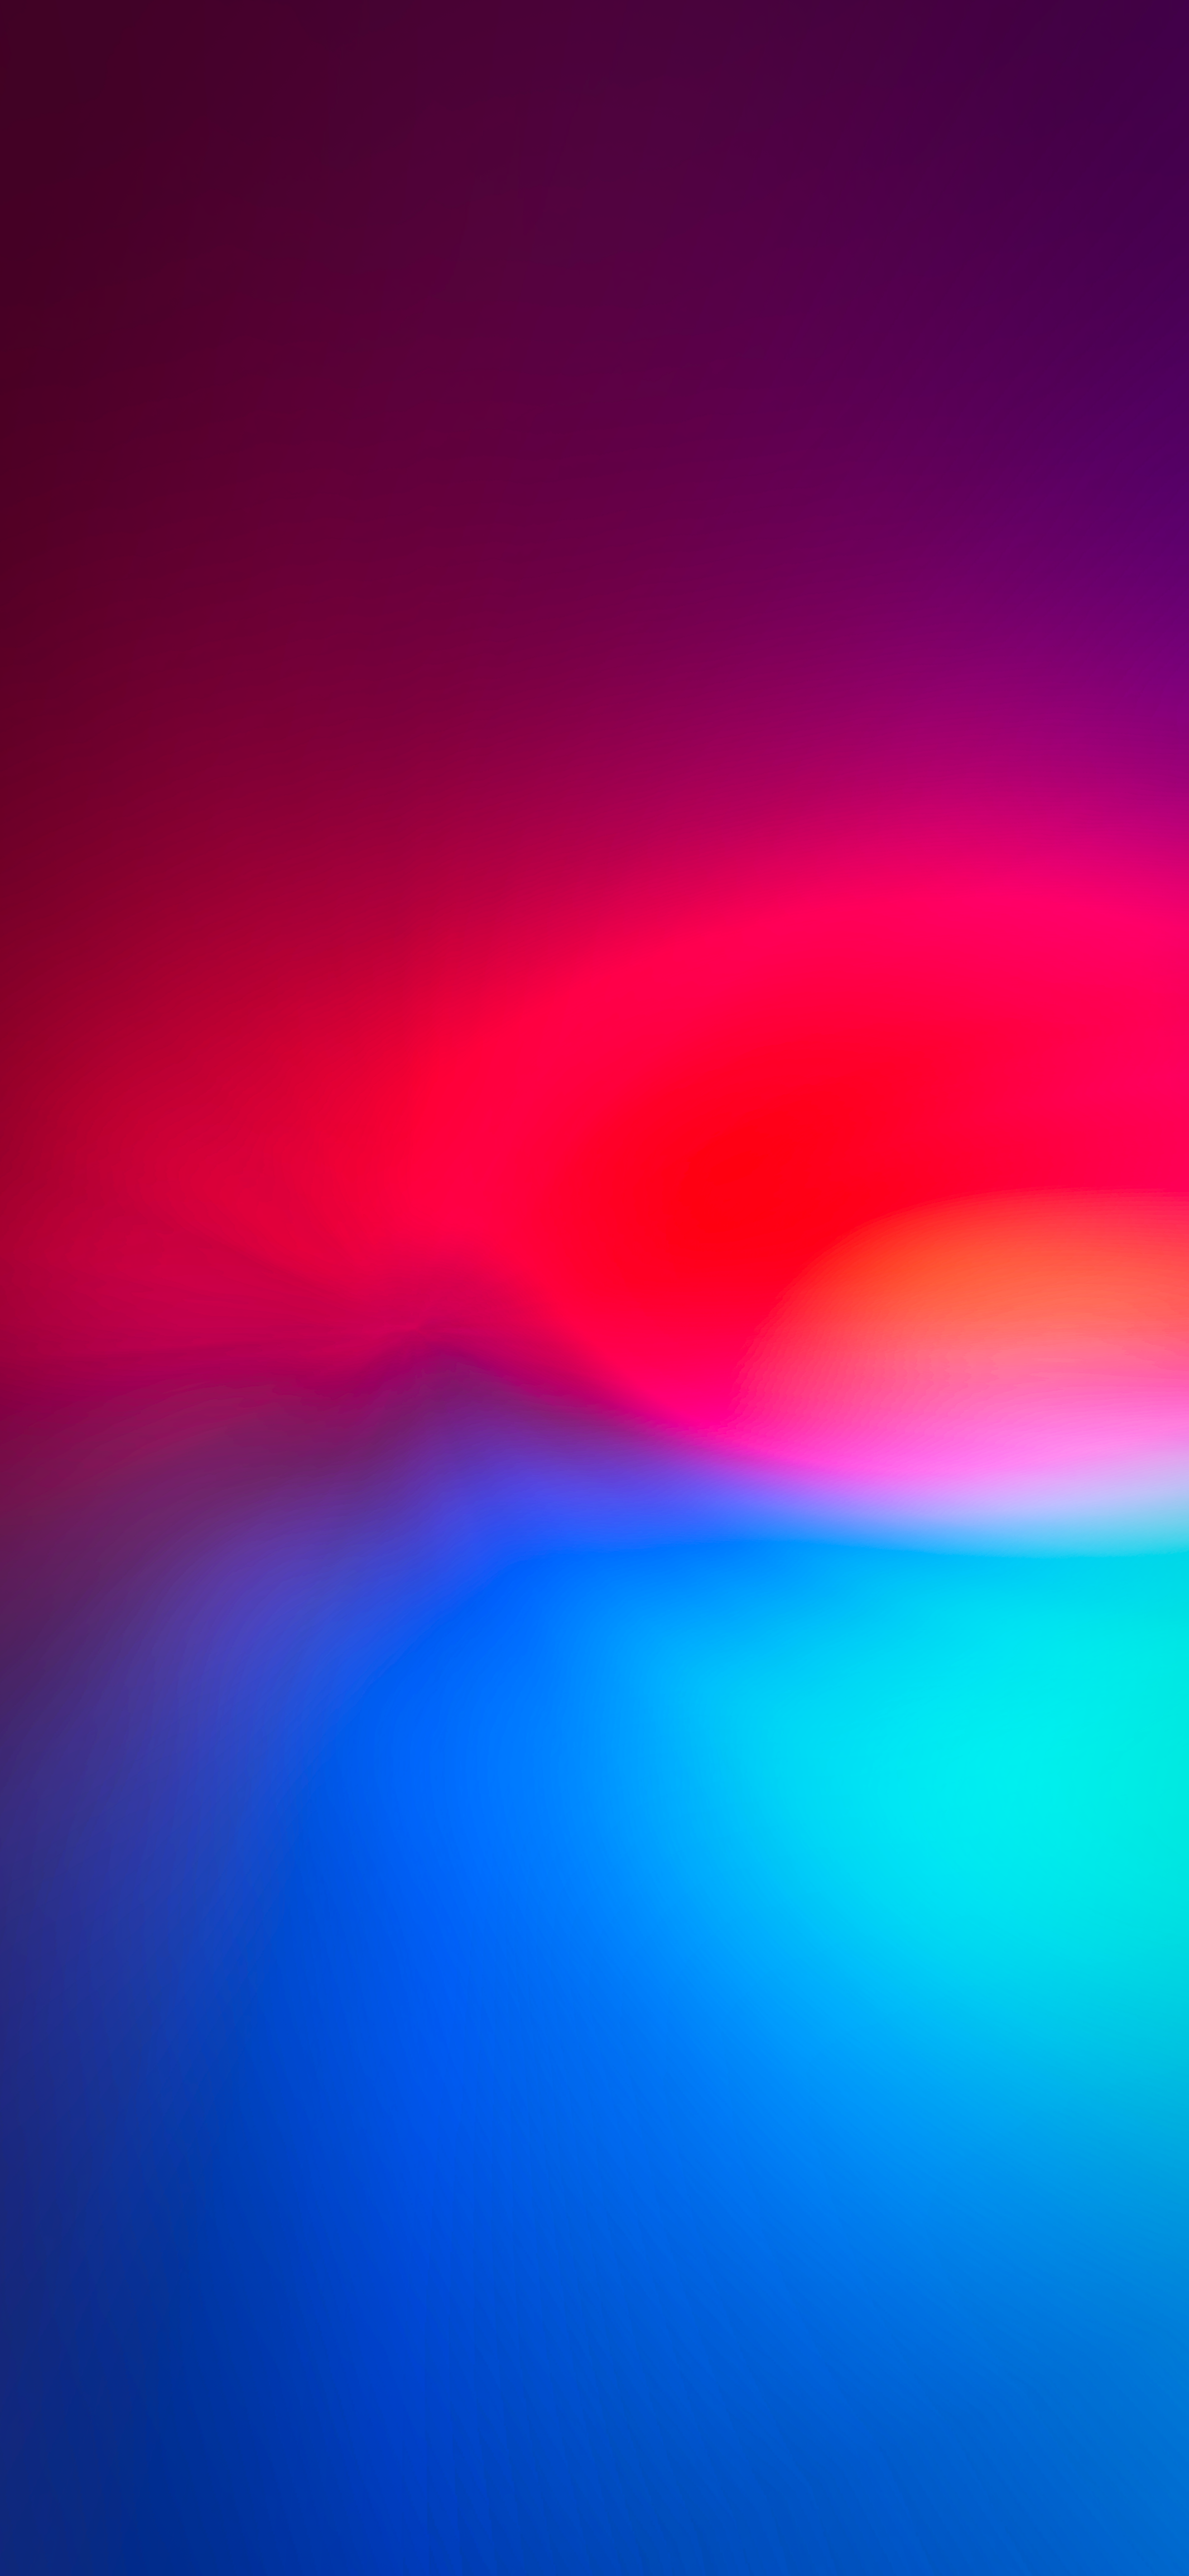 Red To Blue Gradient By Wallsbyjfl On Android Wallpaper